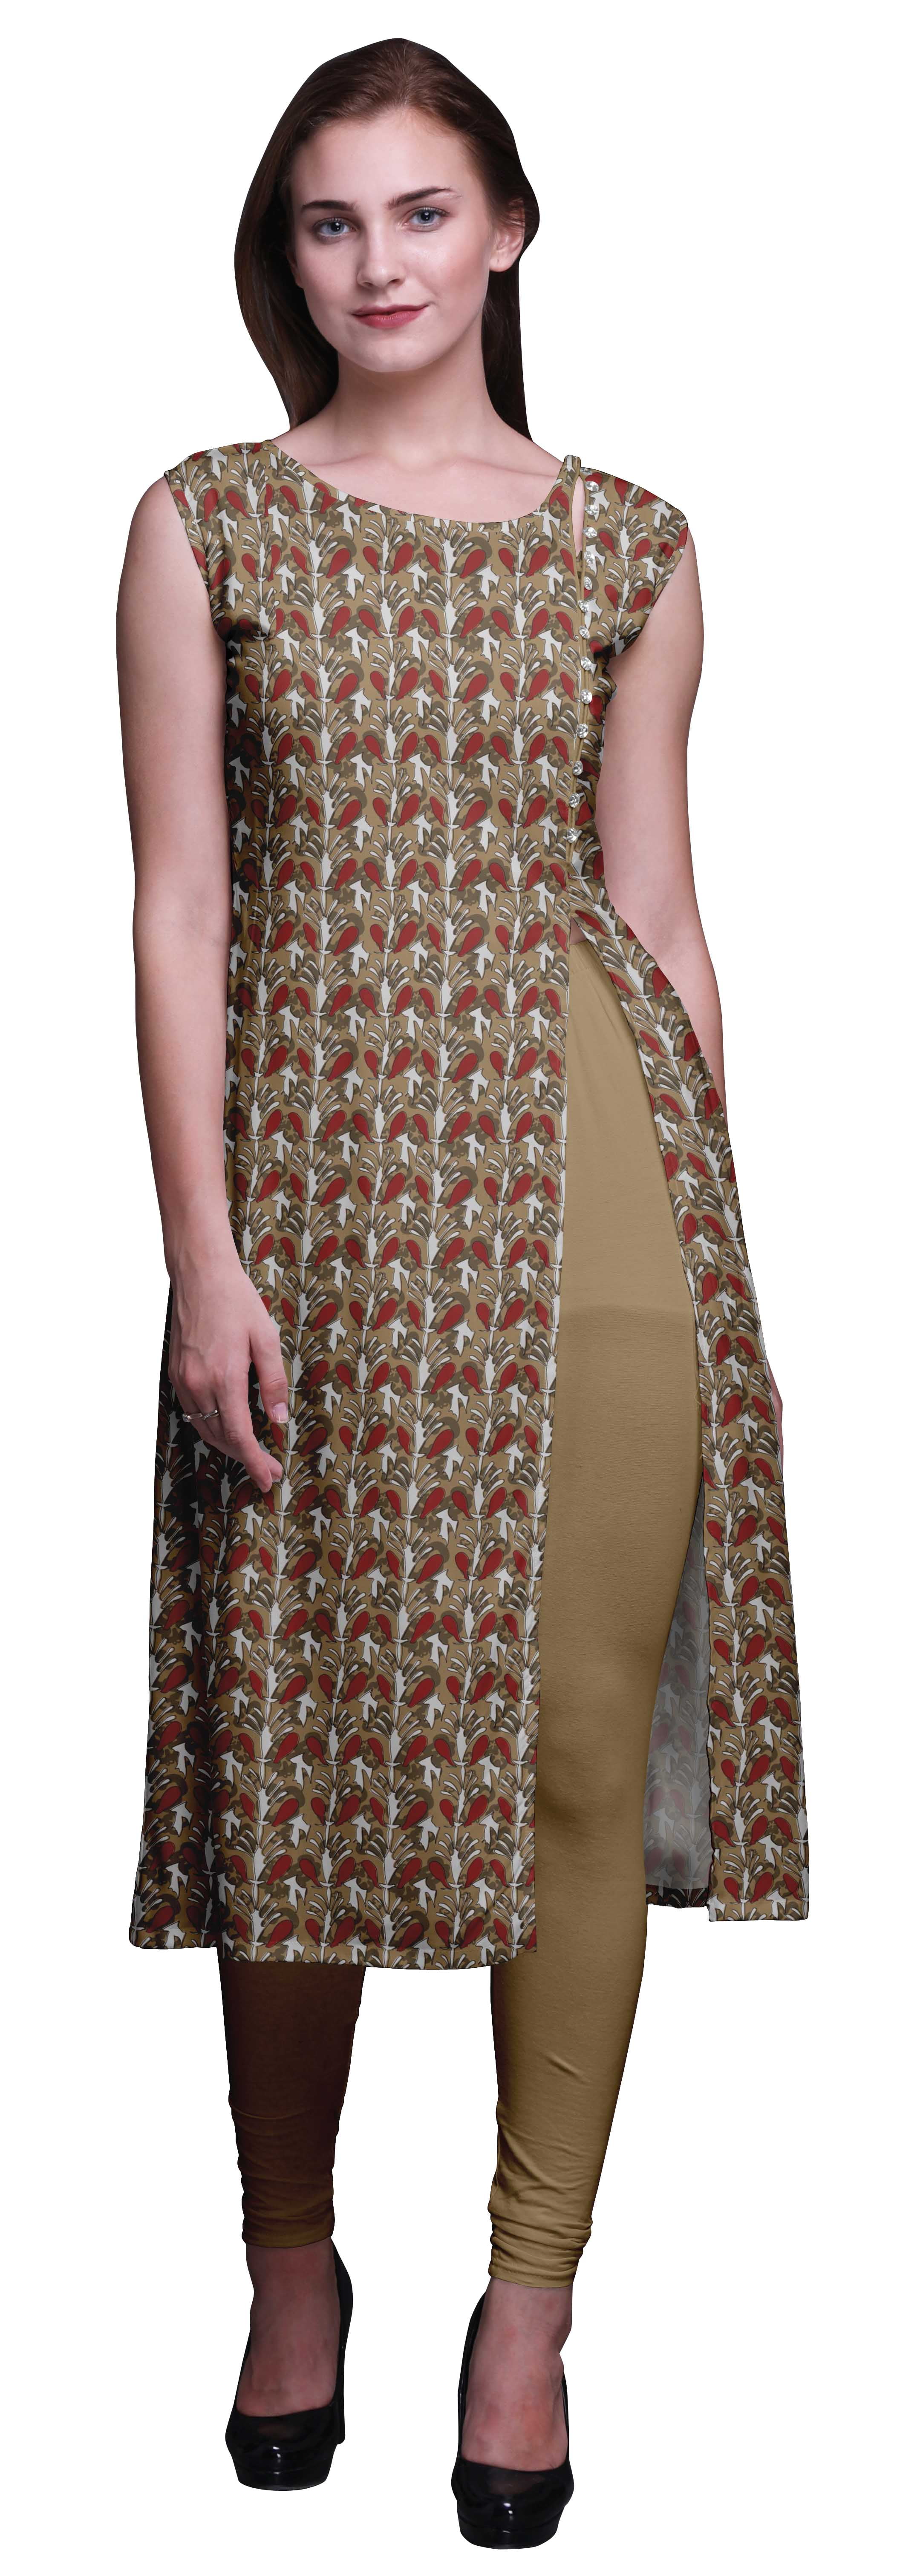 Details about   New Exclusive Indian Women Designer Kurti Pant Party wear dress Top Tunic 